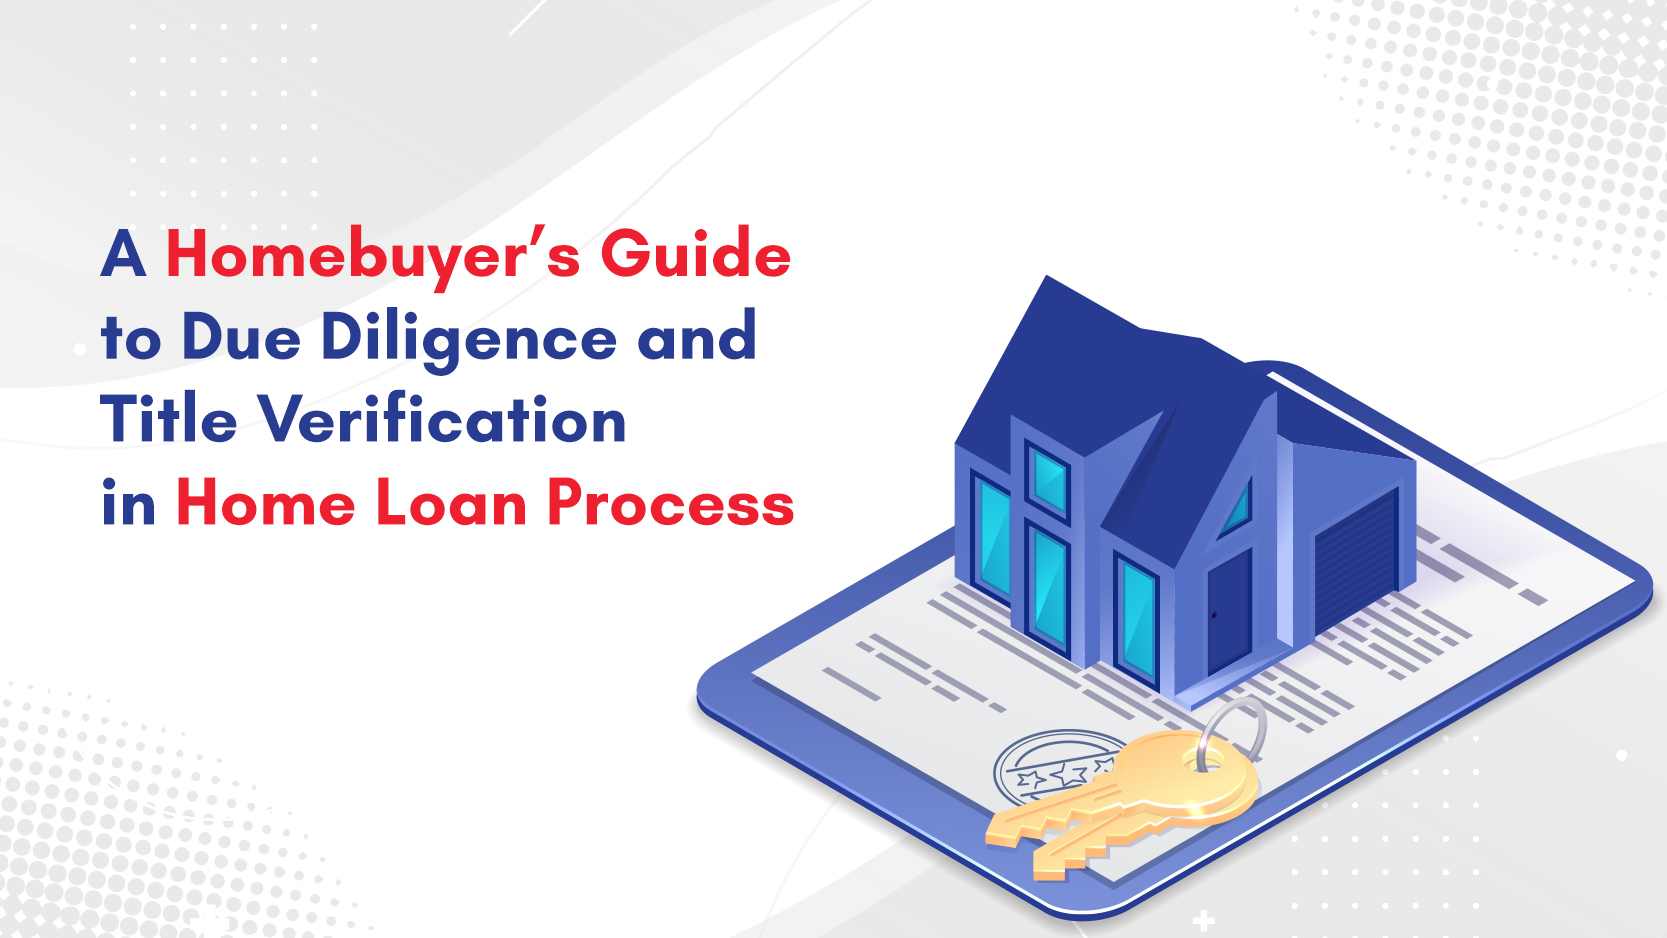 A Homebuyer's Guide to Due Diligence and Title Verification in Home Loan Process